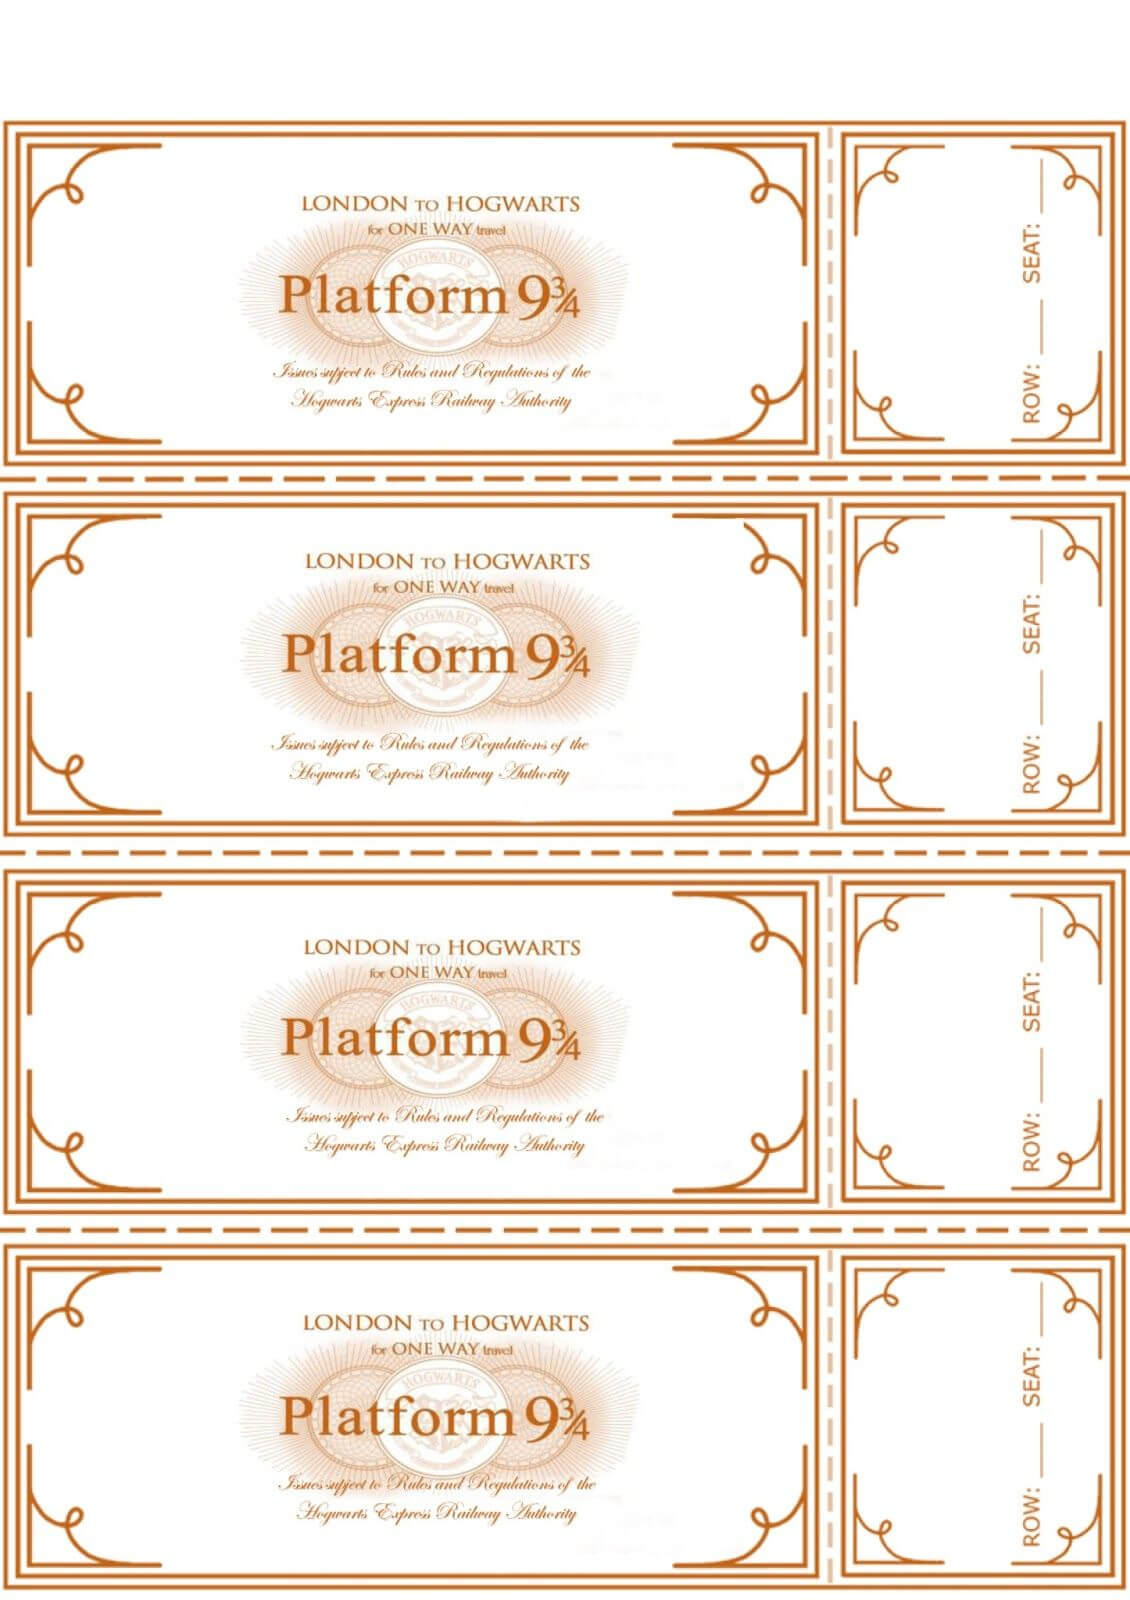 Free Harry Potter Hogwarts Express Ticket Template Plus Intended For Blank Train Ticket Template